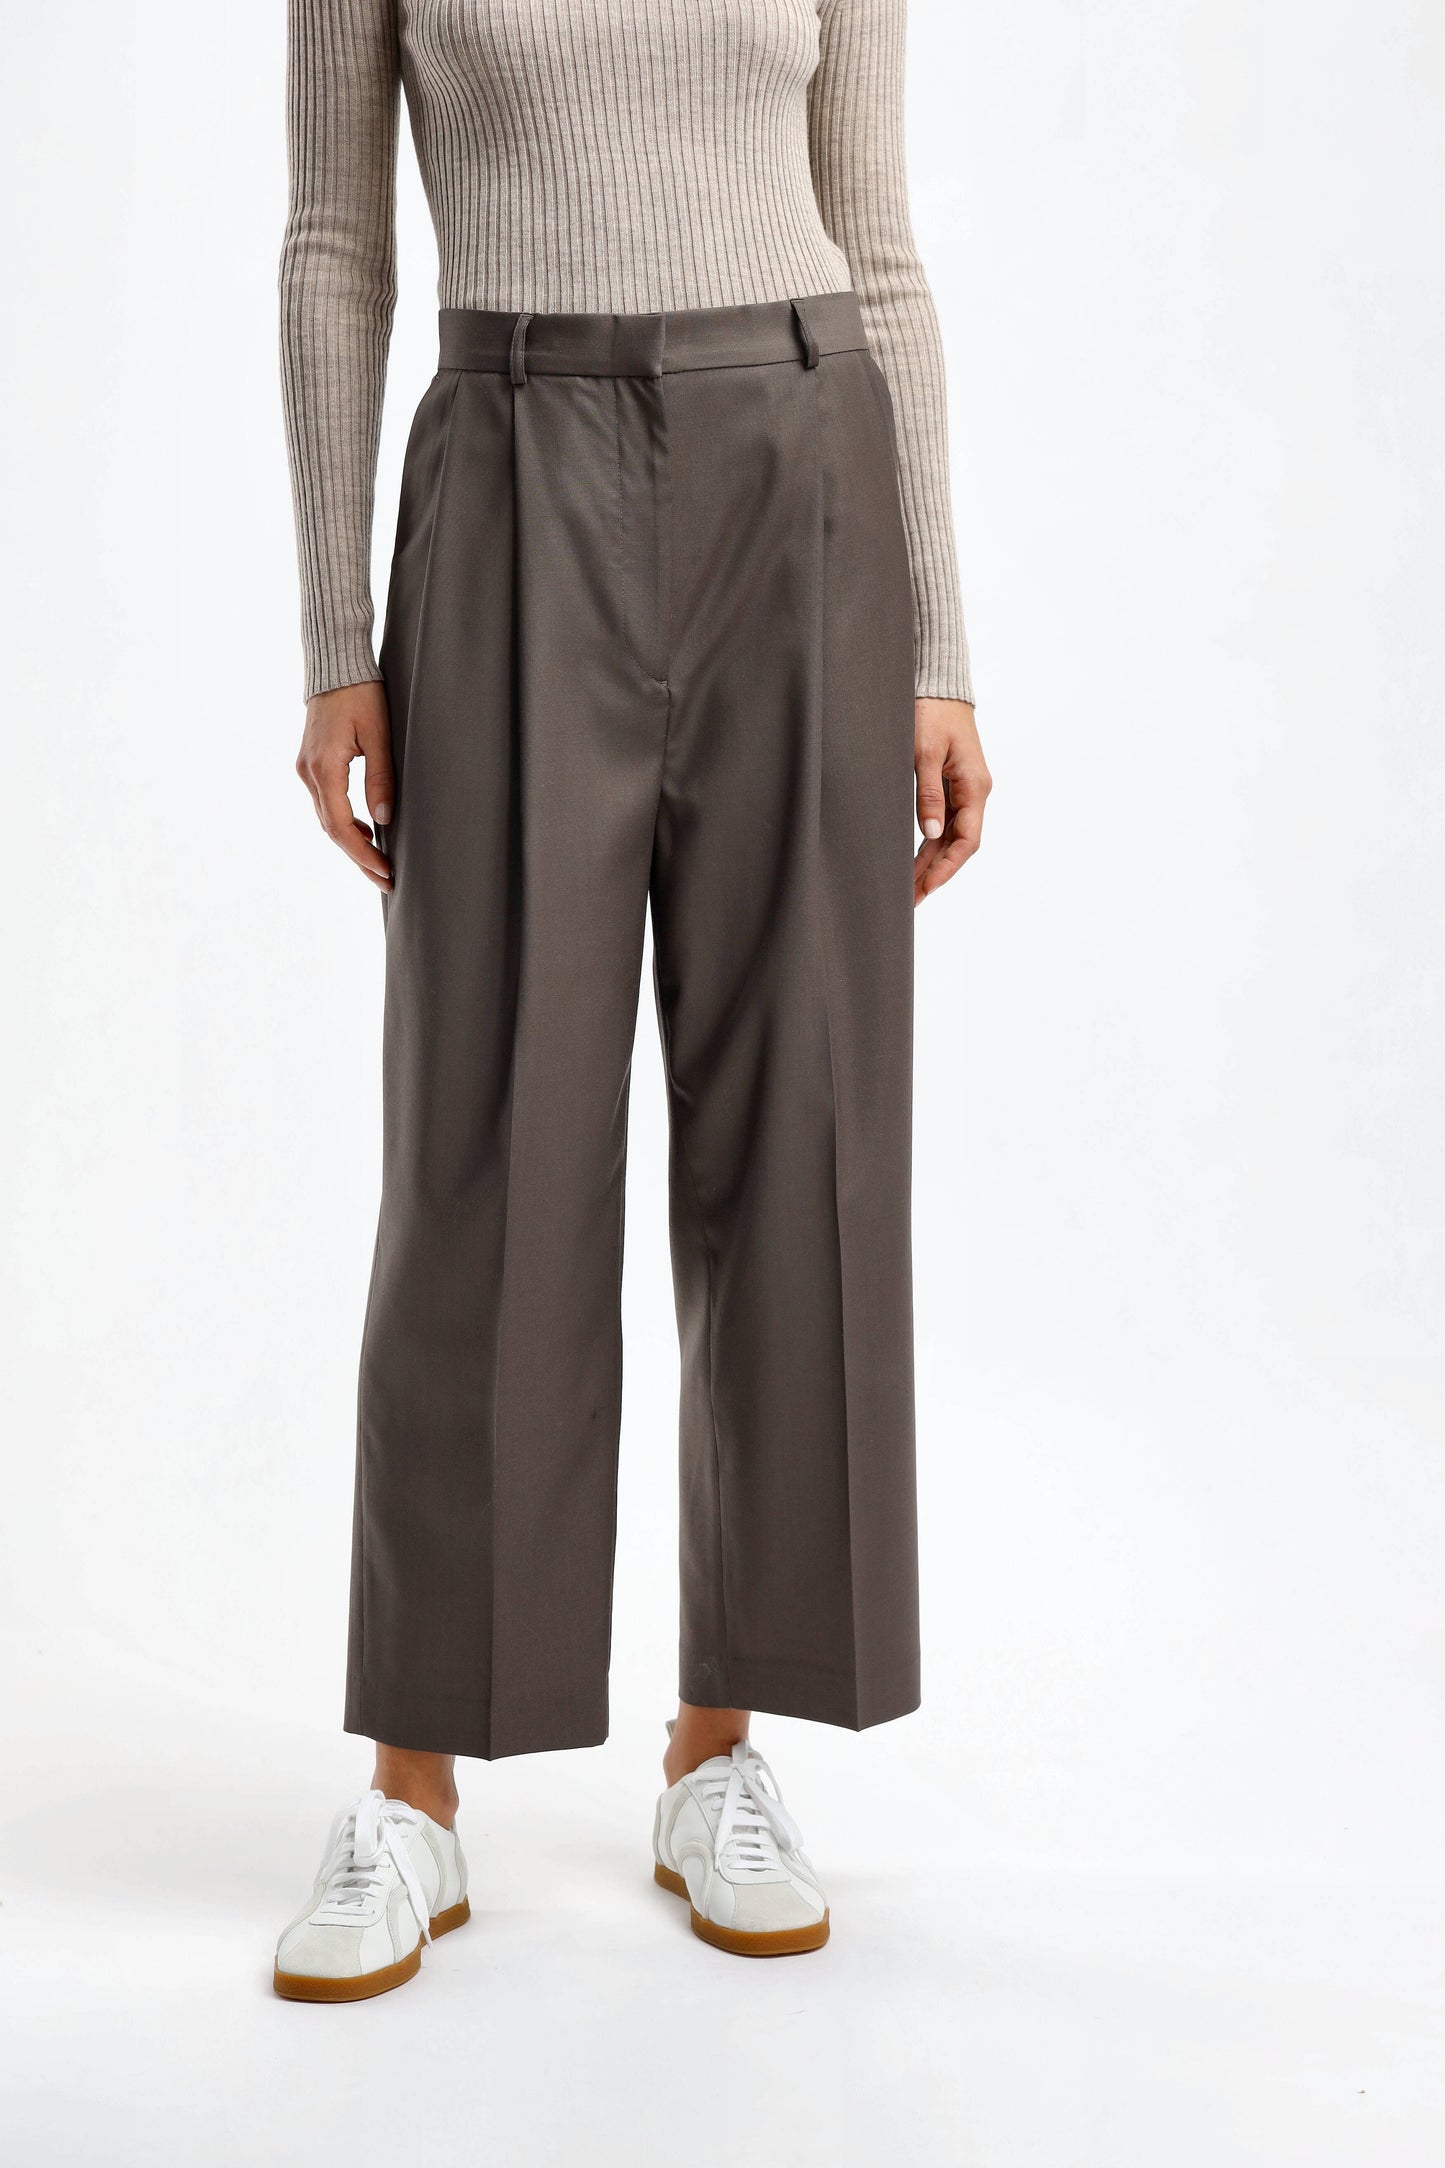 Hose Double-Pleated Crop in AshToteme - Anita Hass